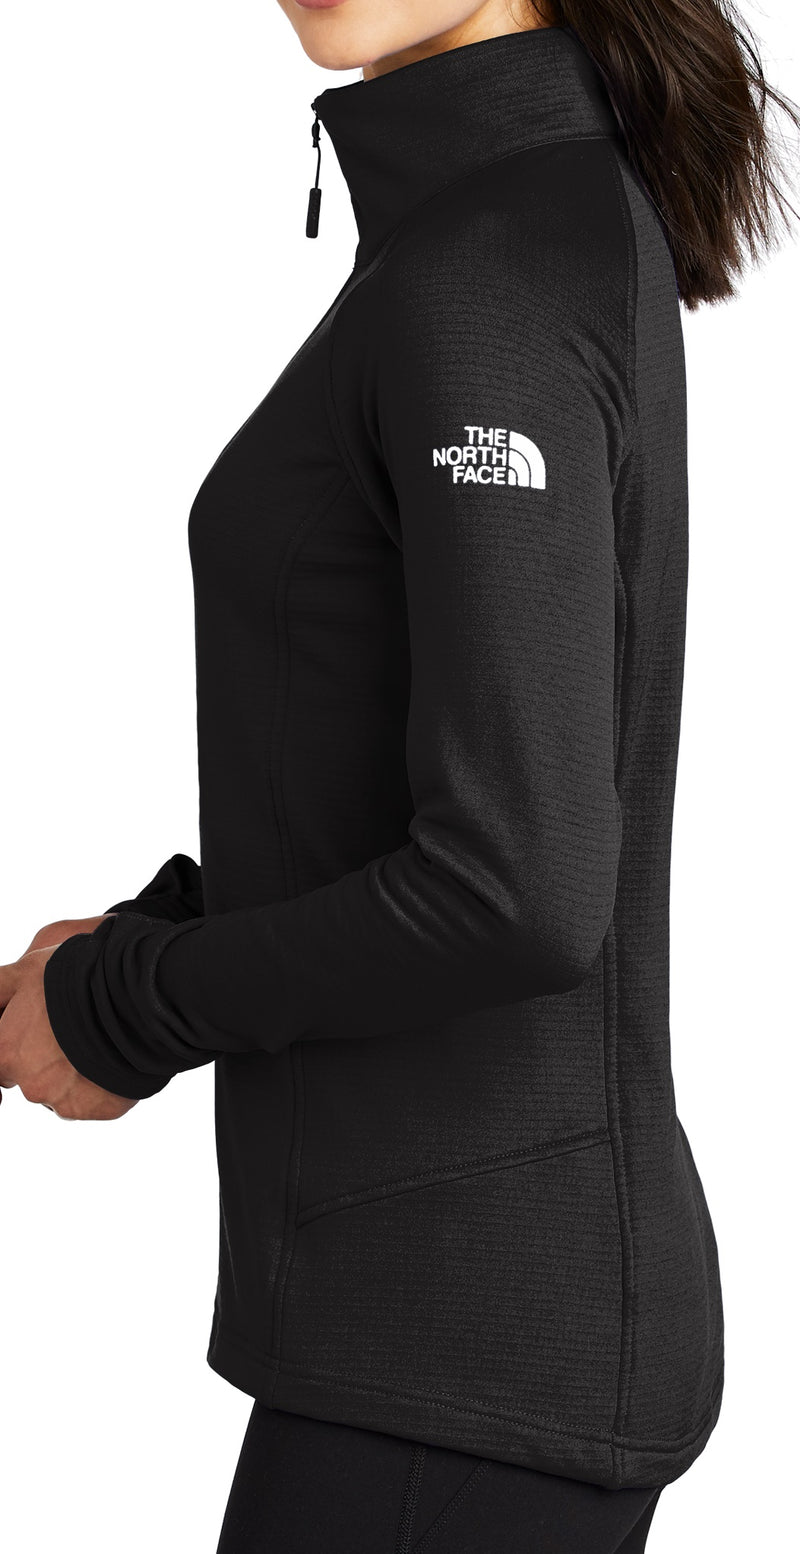 The North Face [NF0A47FC] Ladies Mountain Peaks 1/4-Zip Fleece.